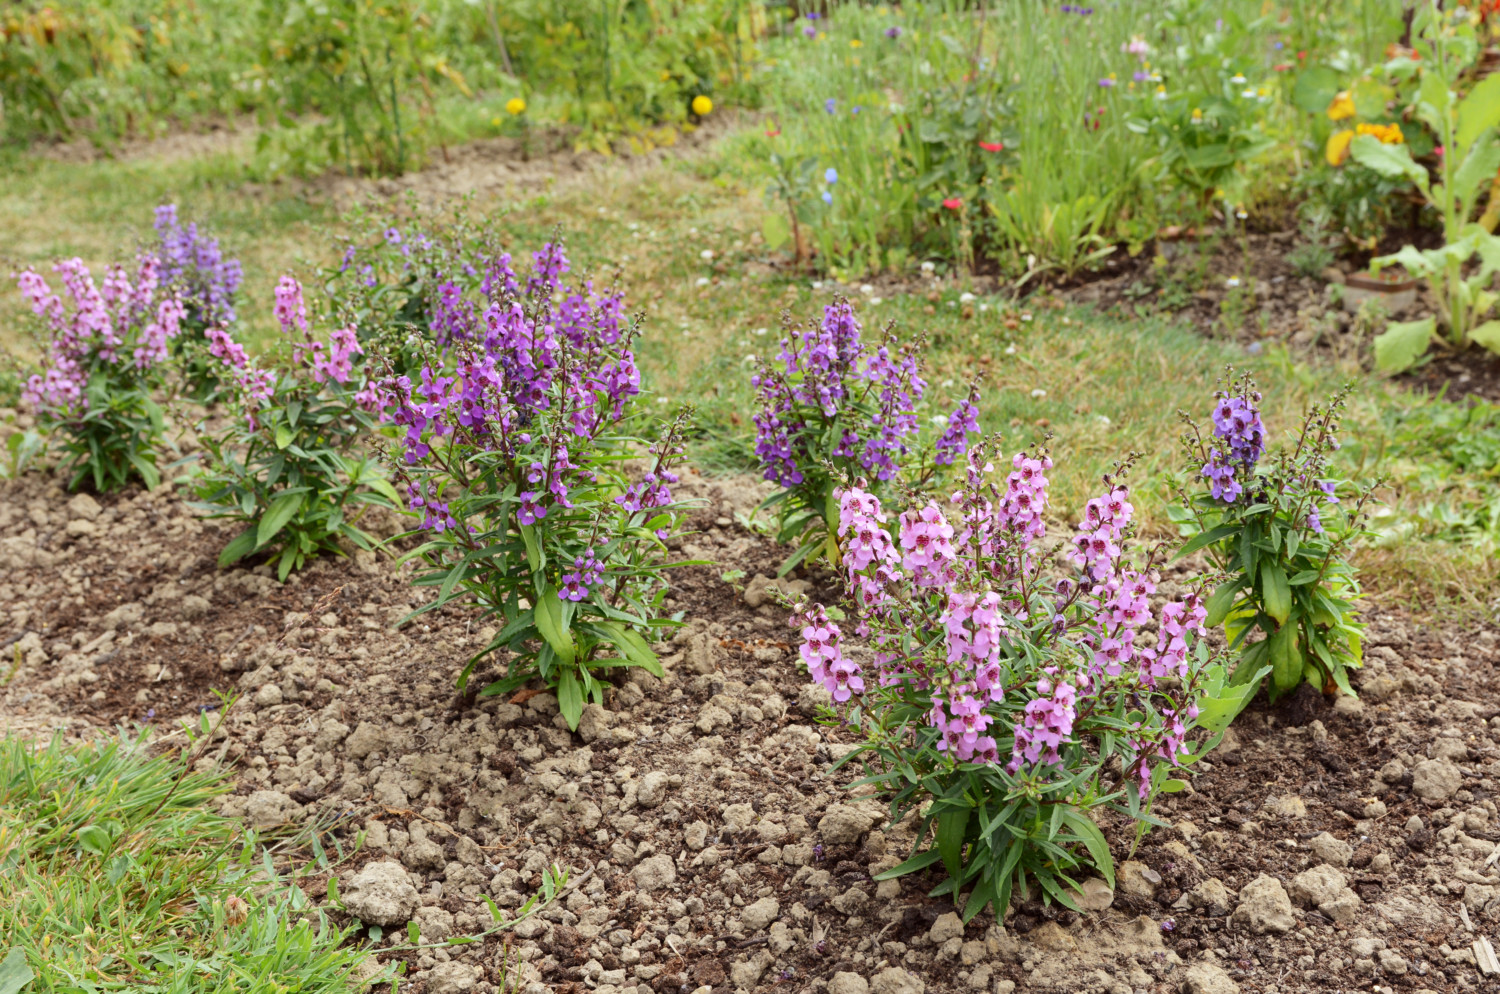 Garden flower bed filled with angelonia plants in shades of pink and purple